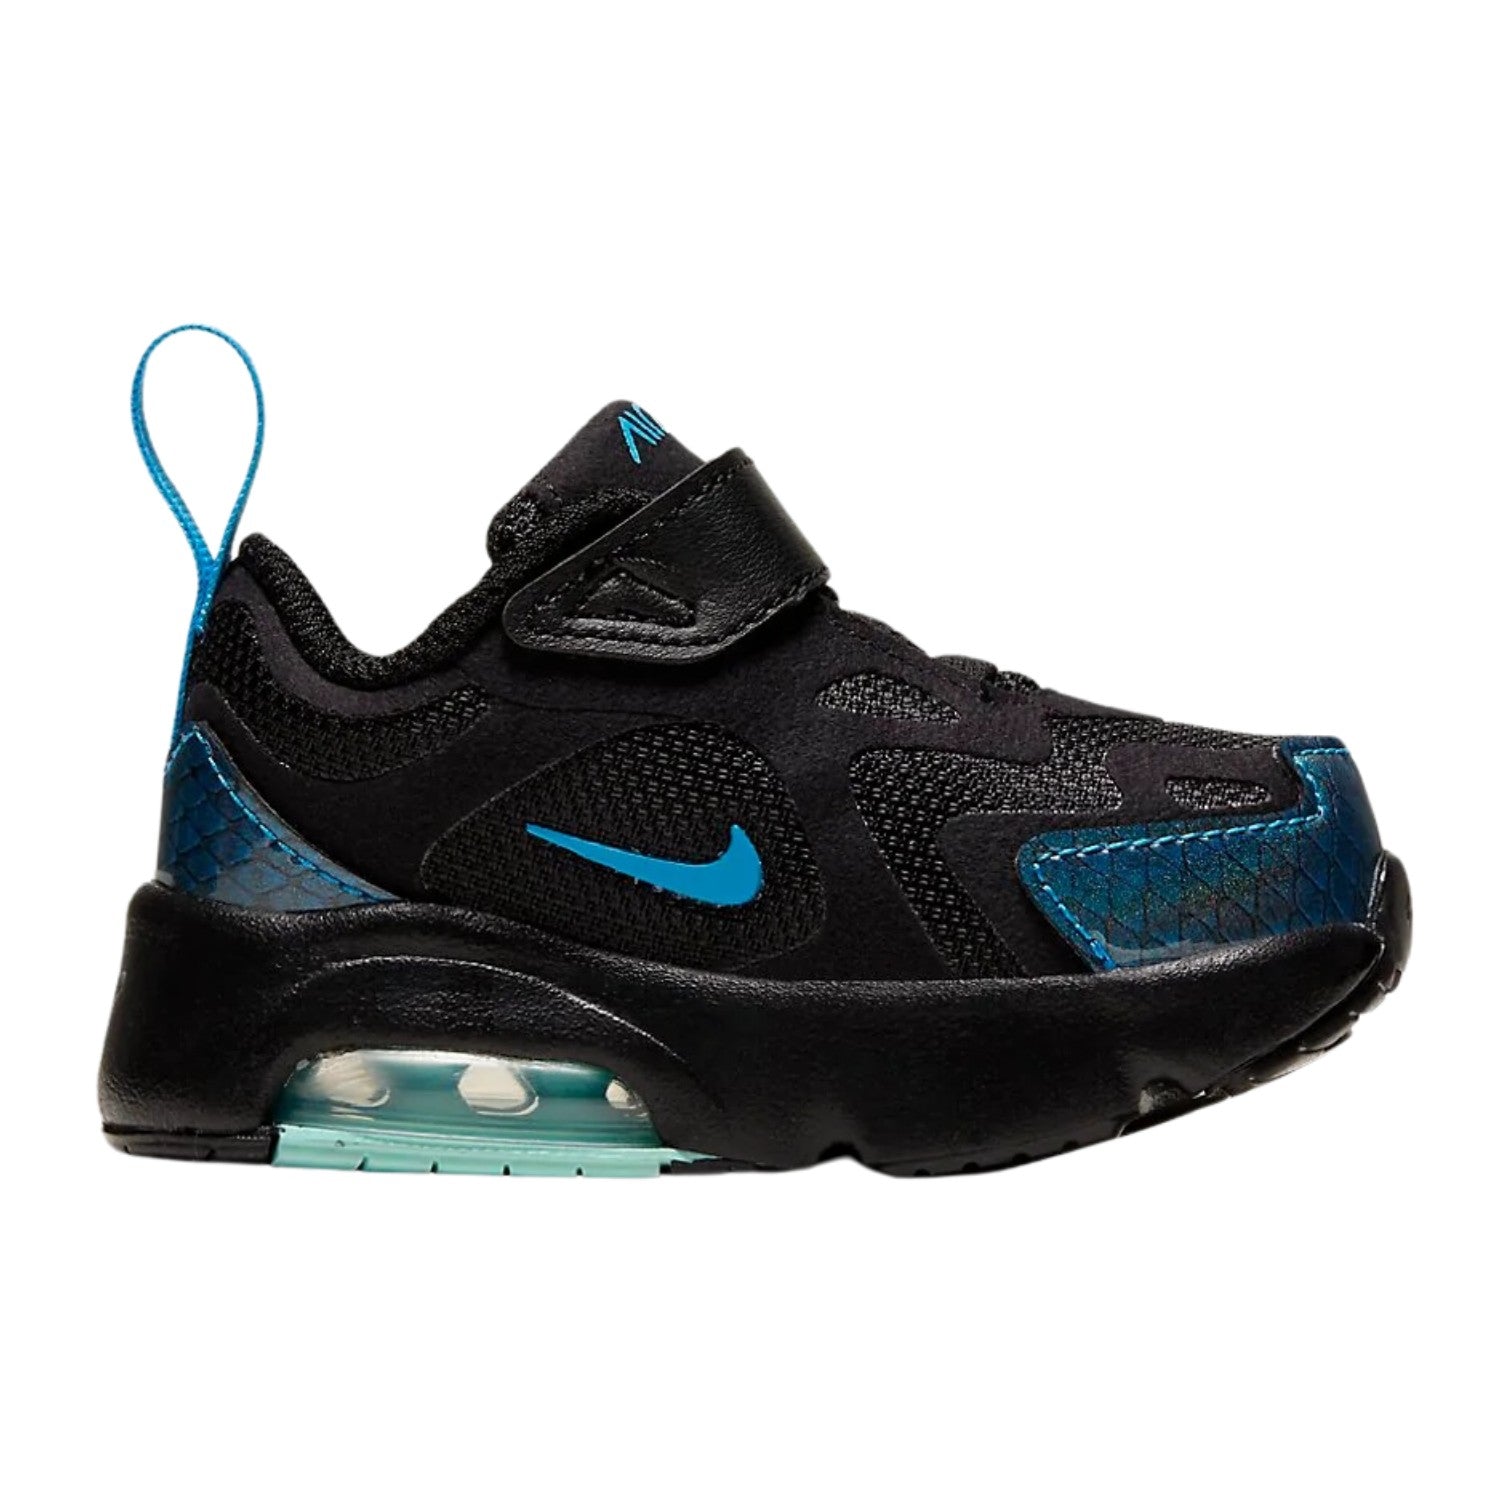 Nike Air Max 200 Bby Drgn Td Toddlers Style : Cq4008